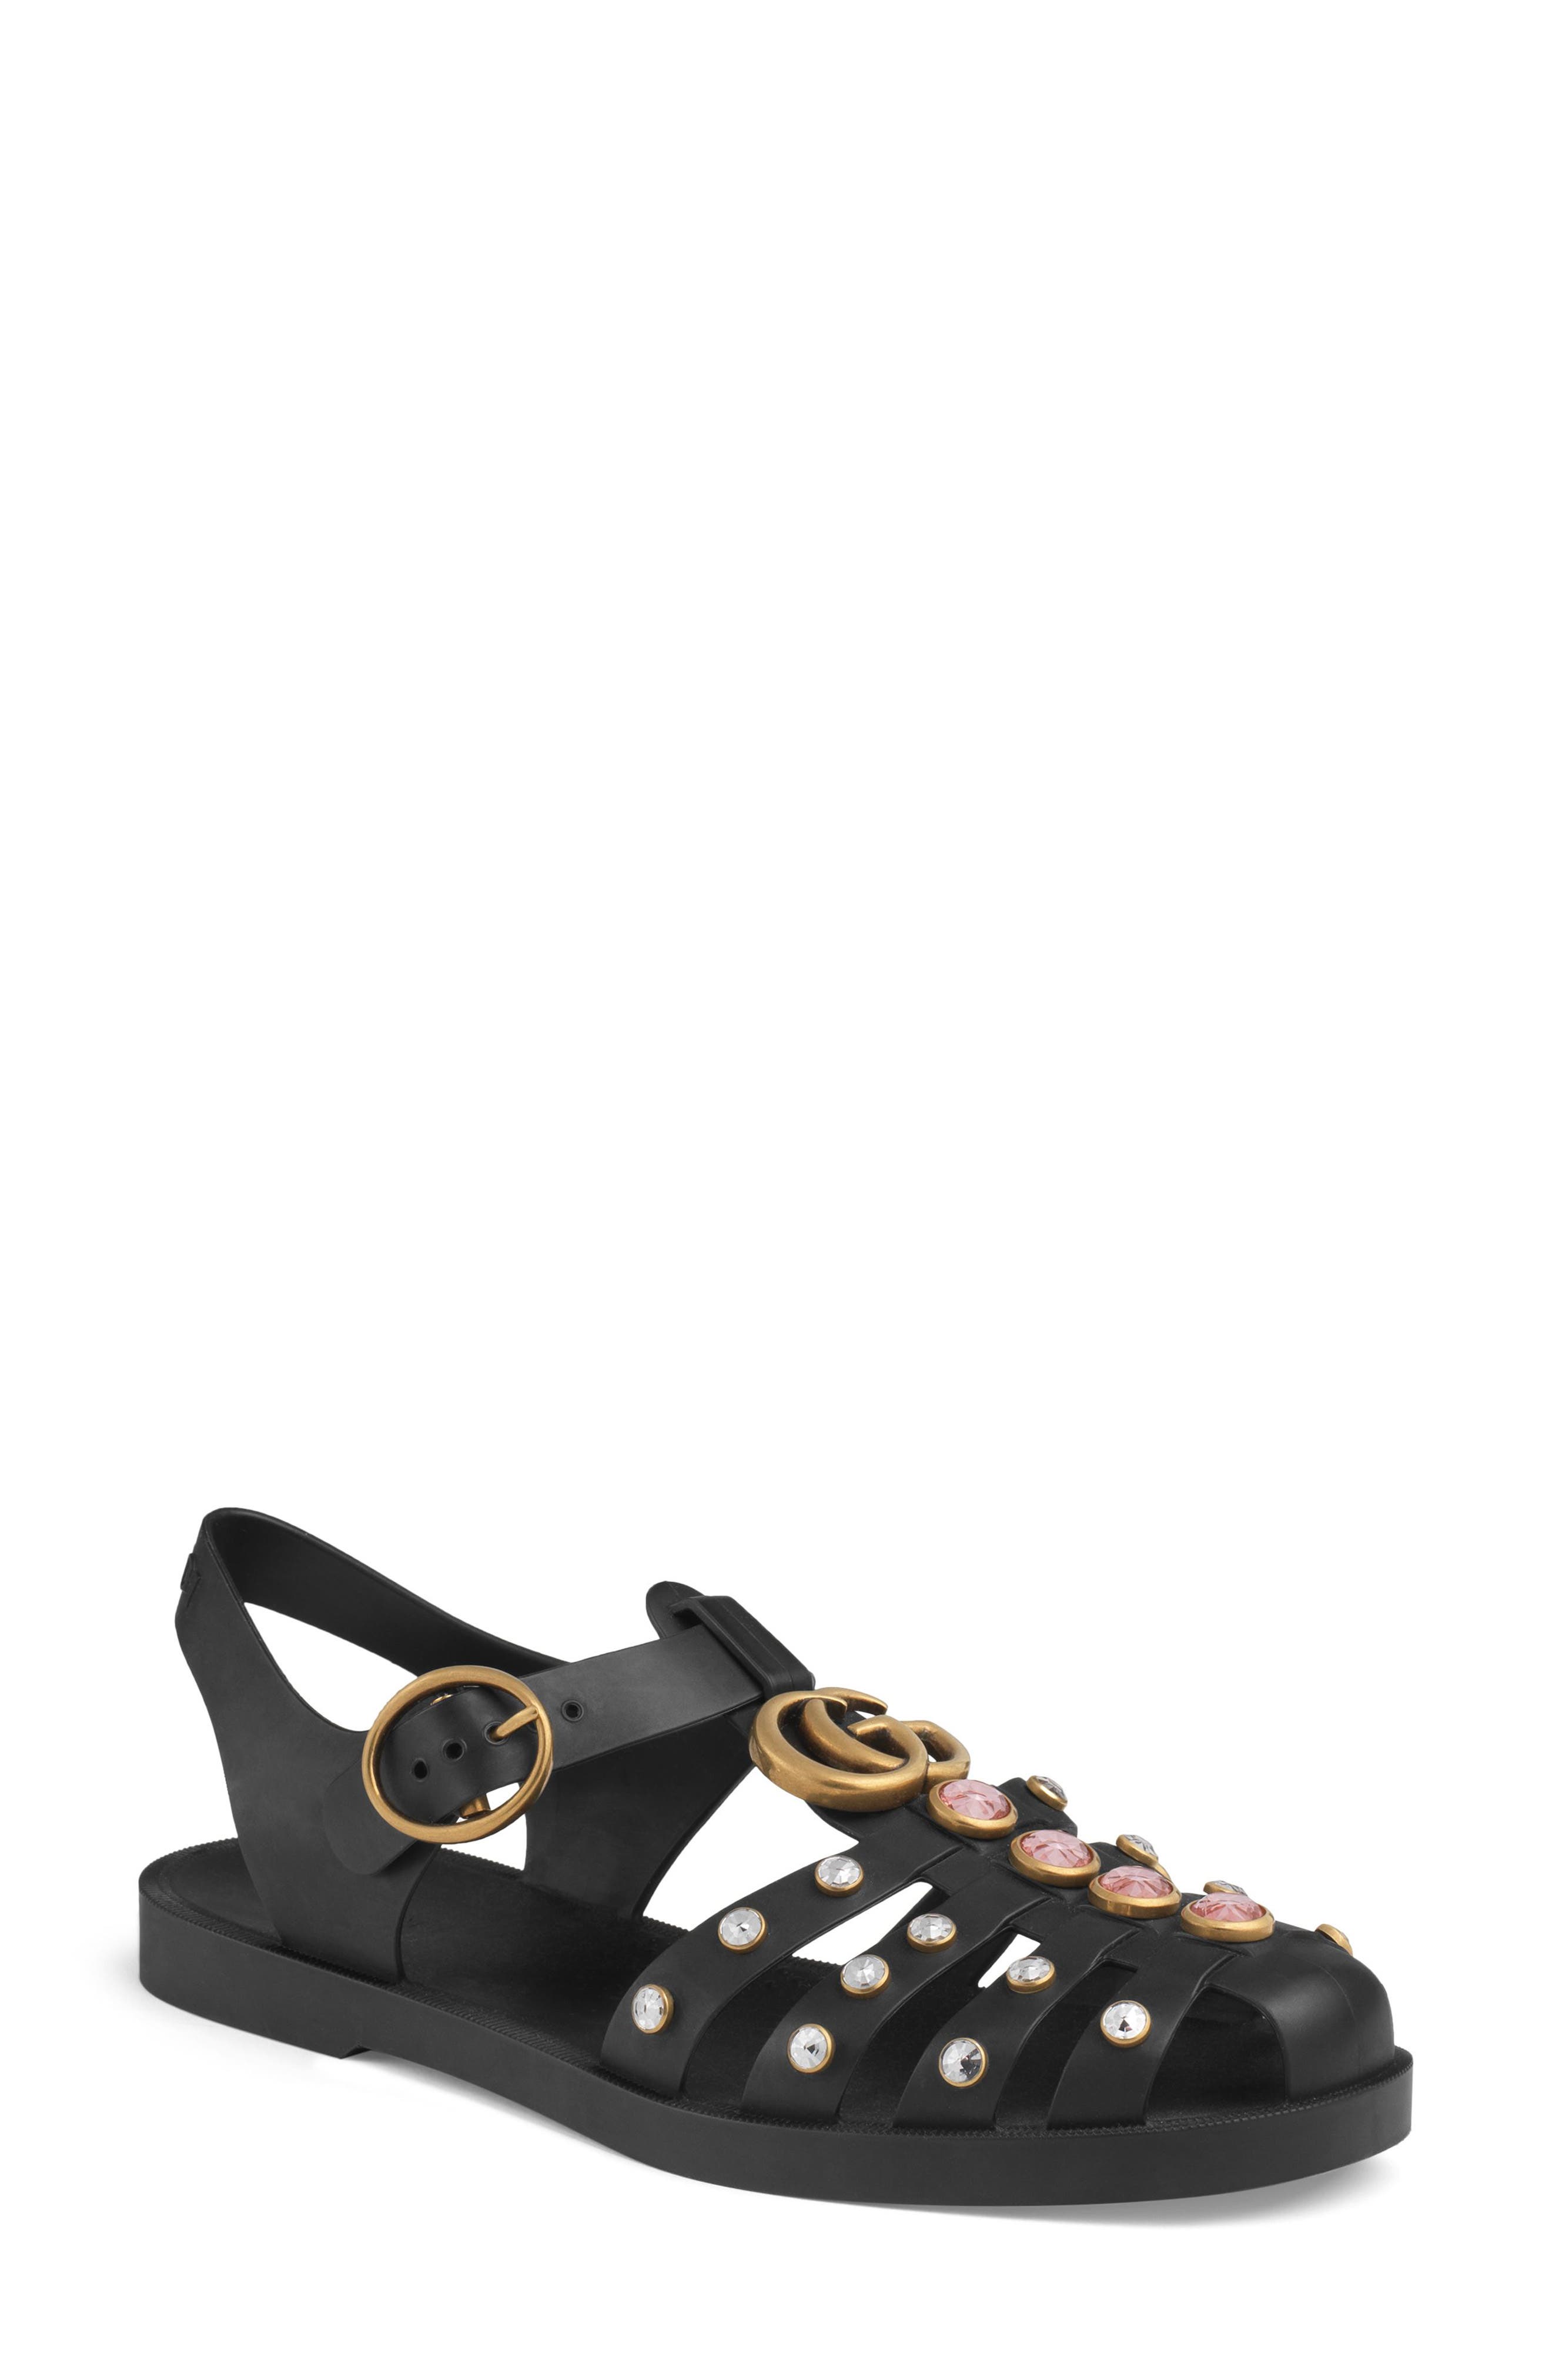 gucci rubber sandals with crystals